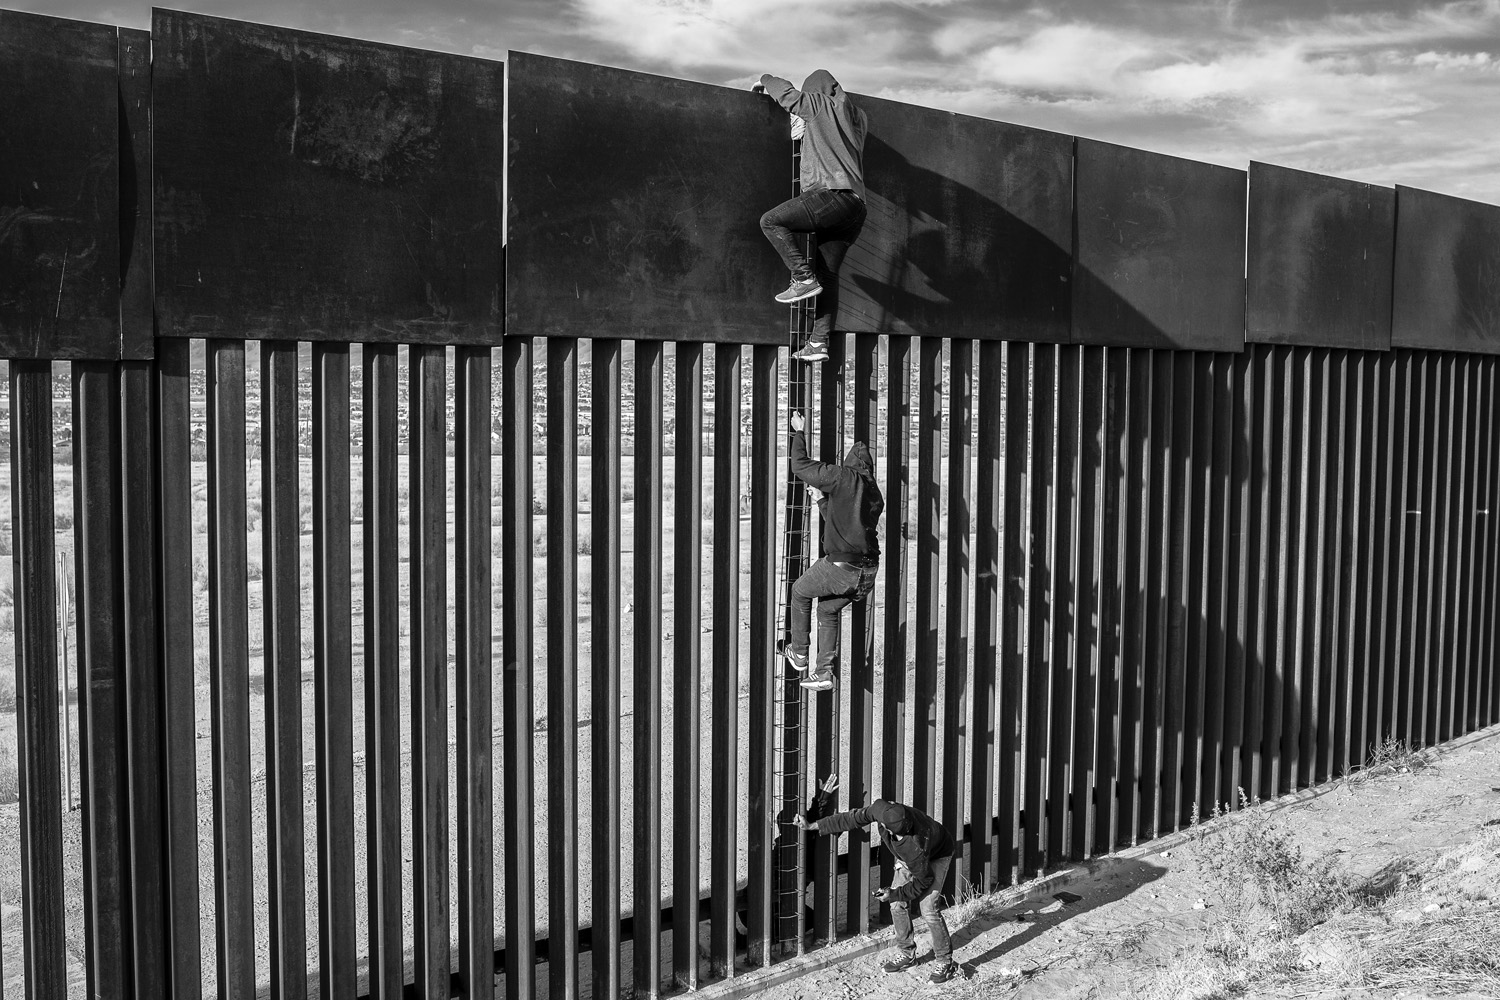 Two individuals are seen climbing a tall, vertical metal barrier using a rudimentary ladder. The stark black and white contrast highlights the effort and determination involved in overcoming physical and metaphorical boundaries.